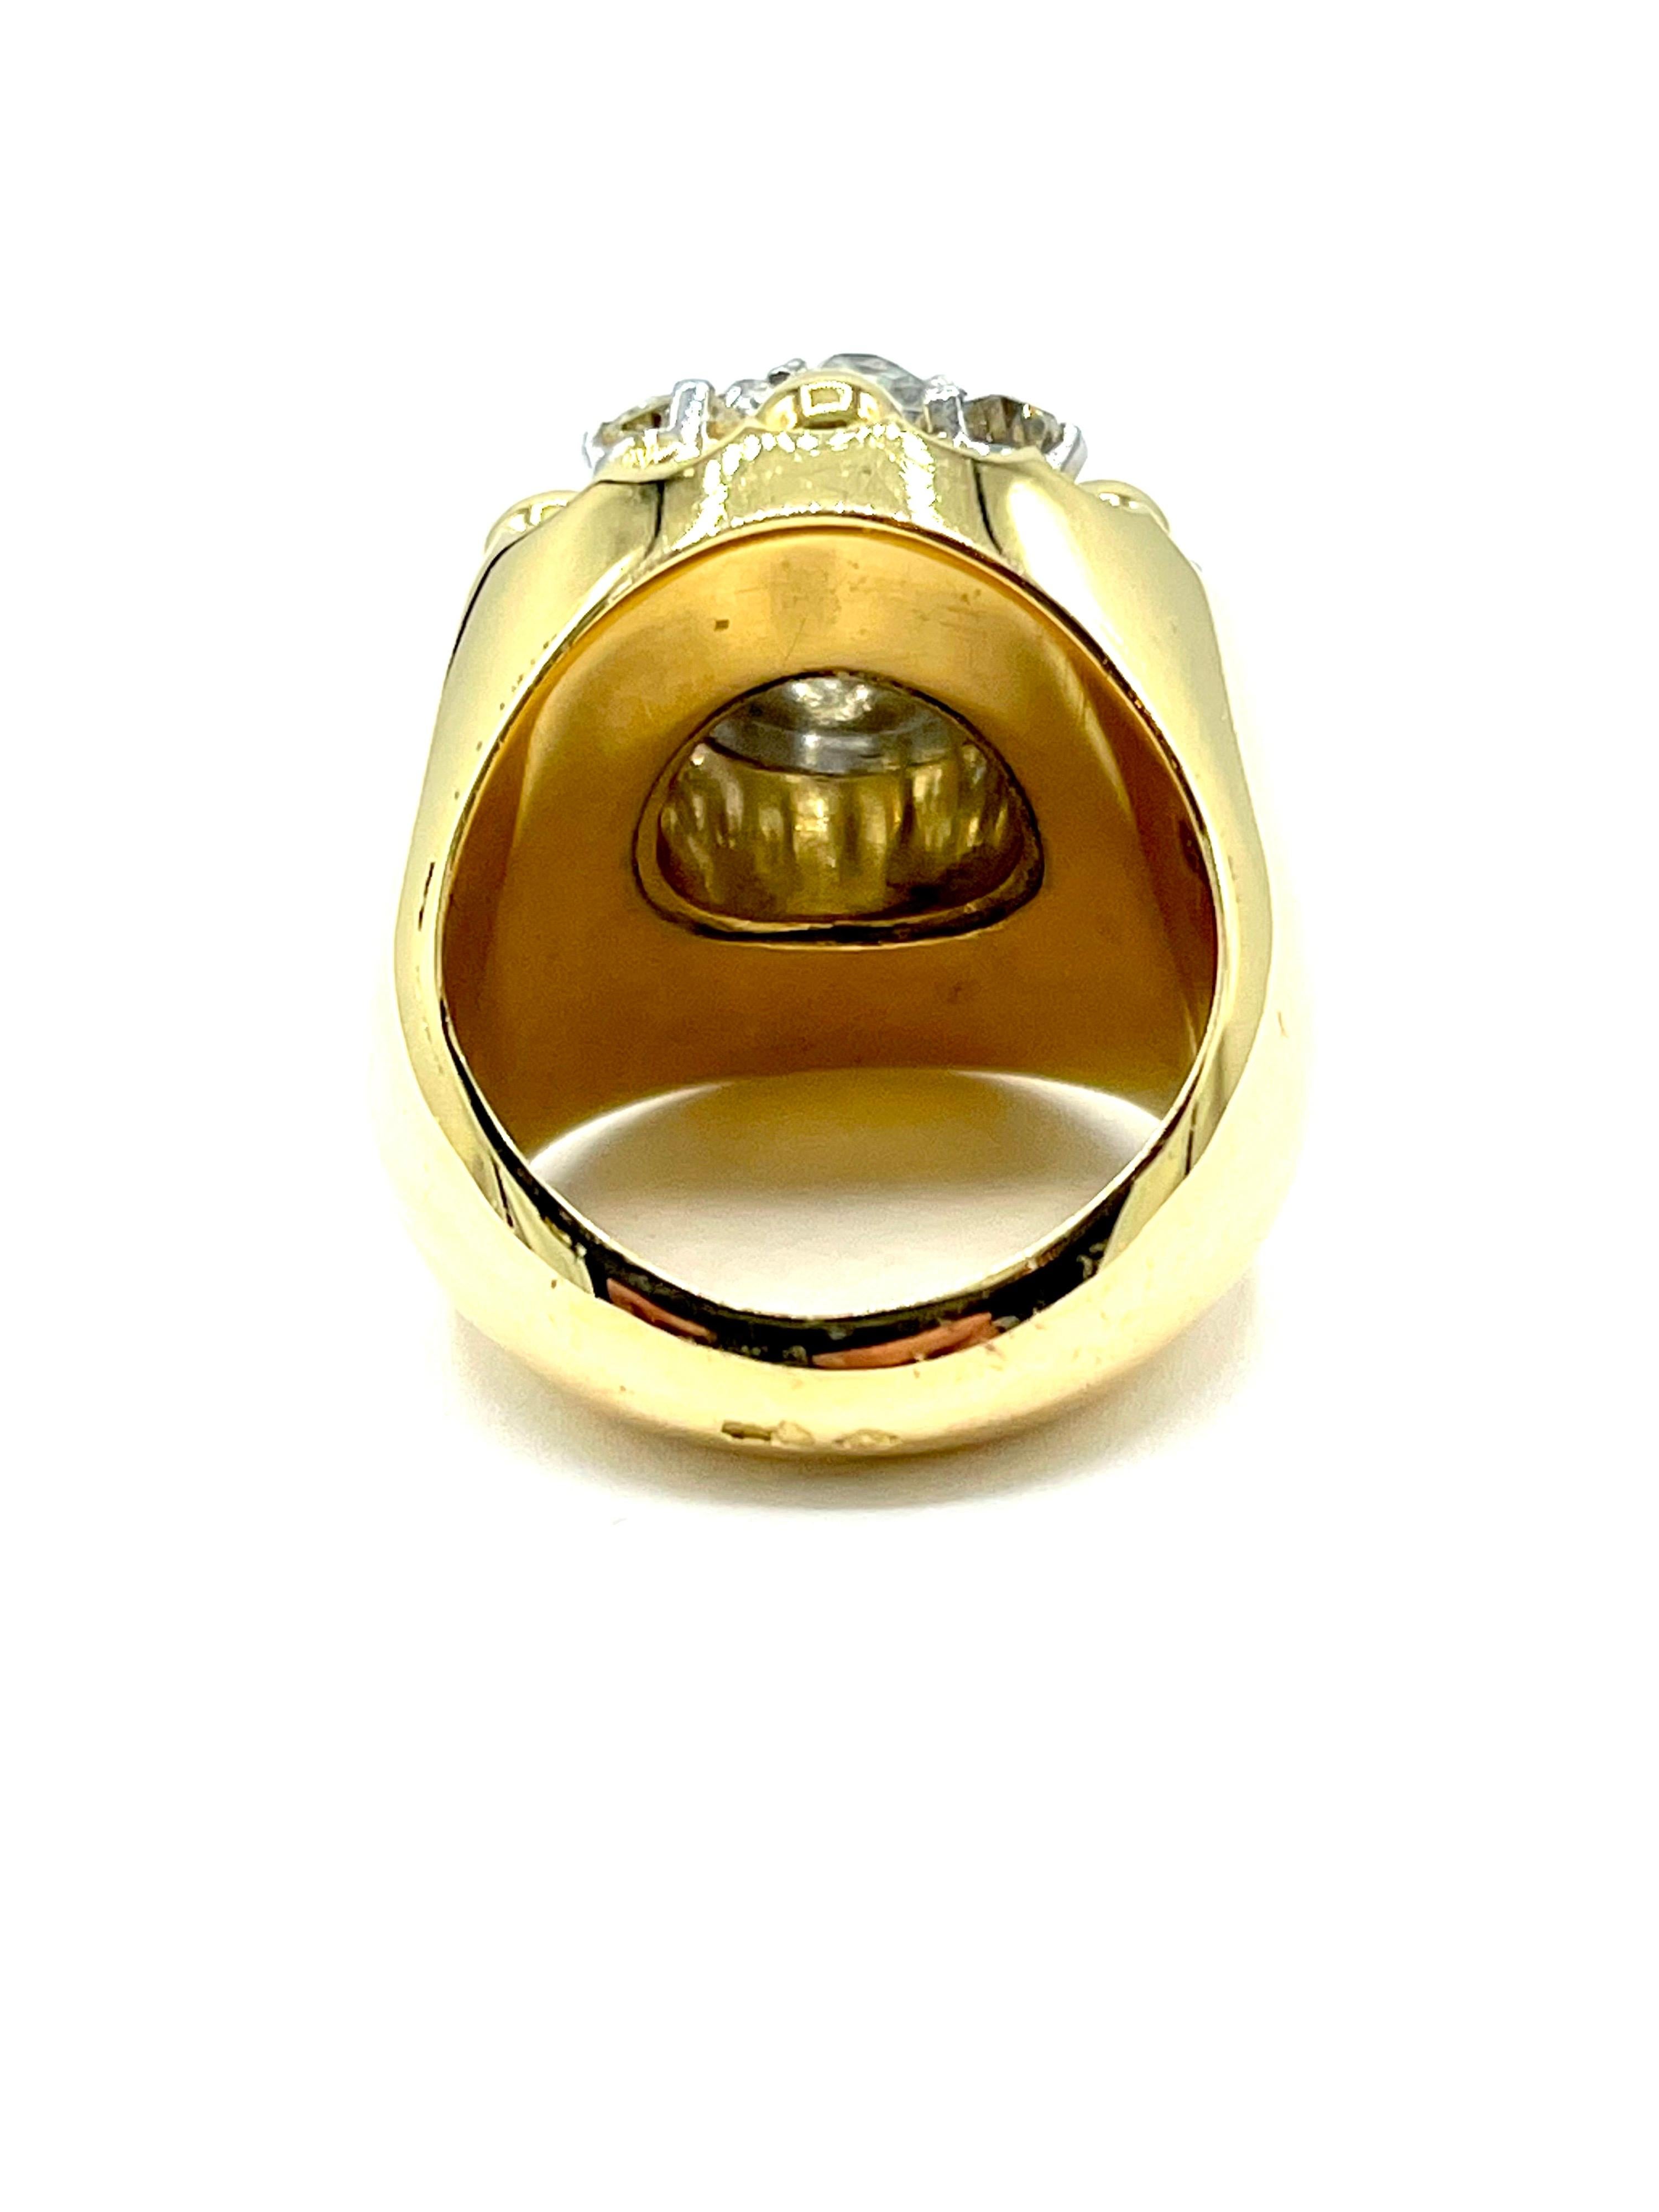 French Made 2.10 Carat Old European Cut Diamond and 18k Yellow Gold Ring For Sale 1